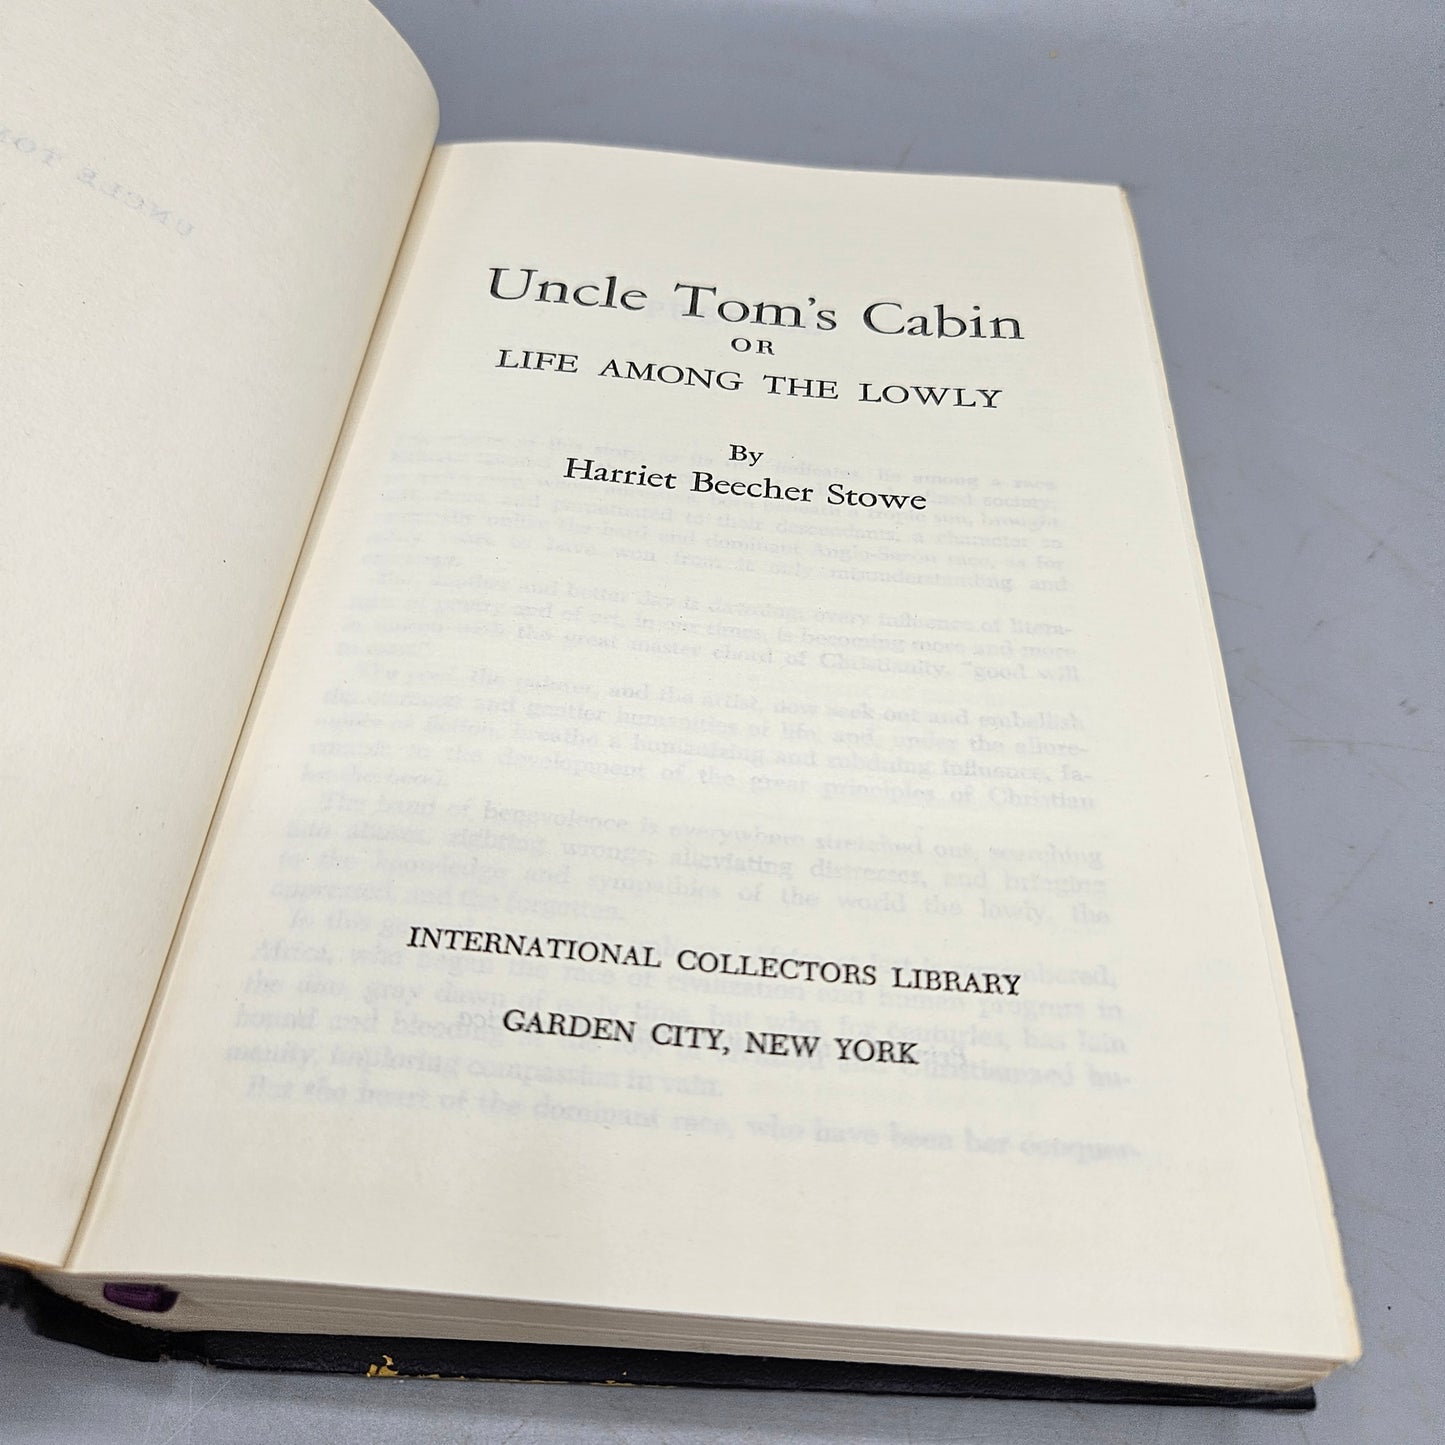 Book: International Collectors Library Uncle Tom's Cabin or Life Among the Lowly by Harriet Beecher Stowe